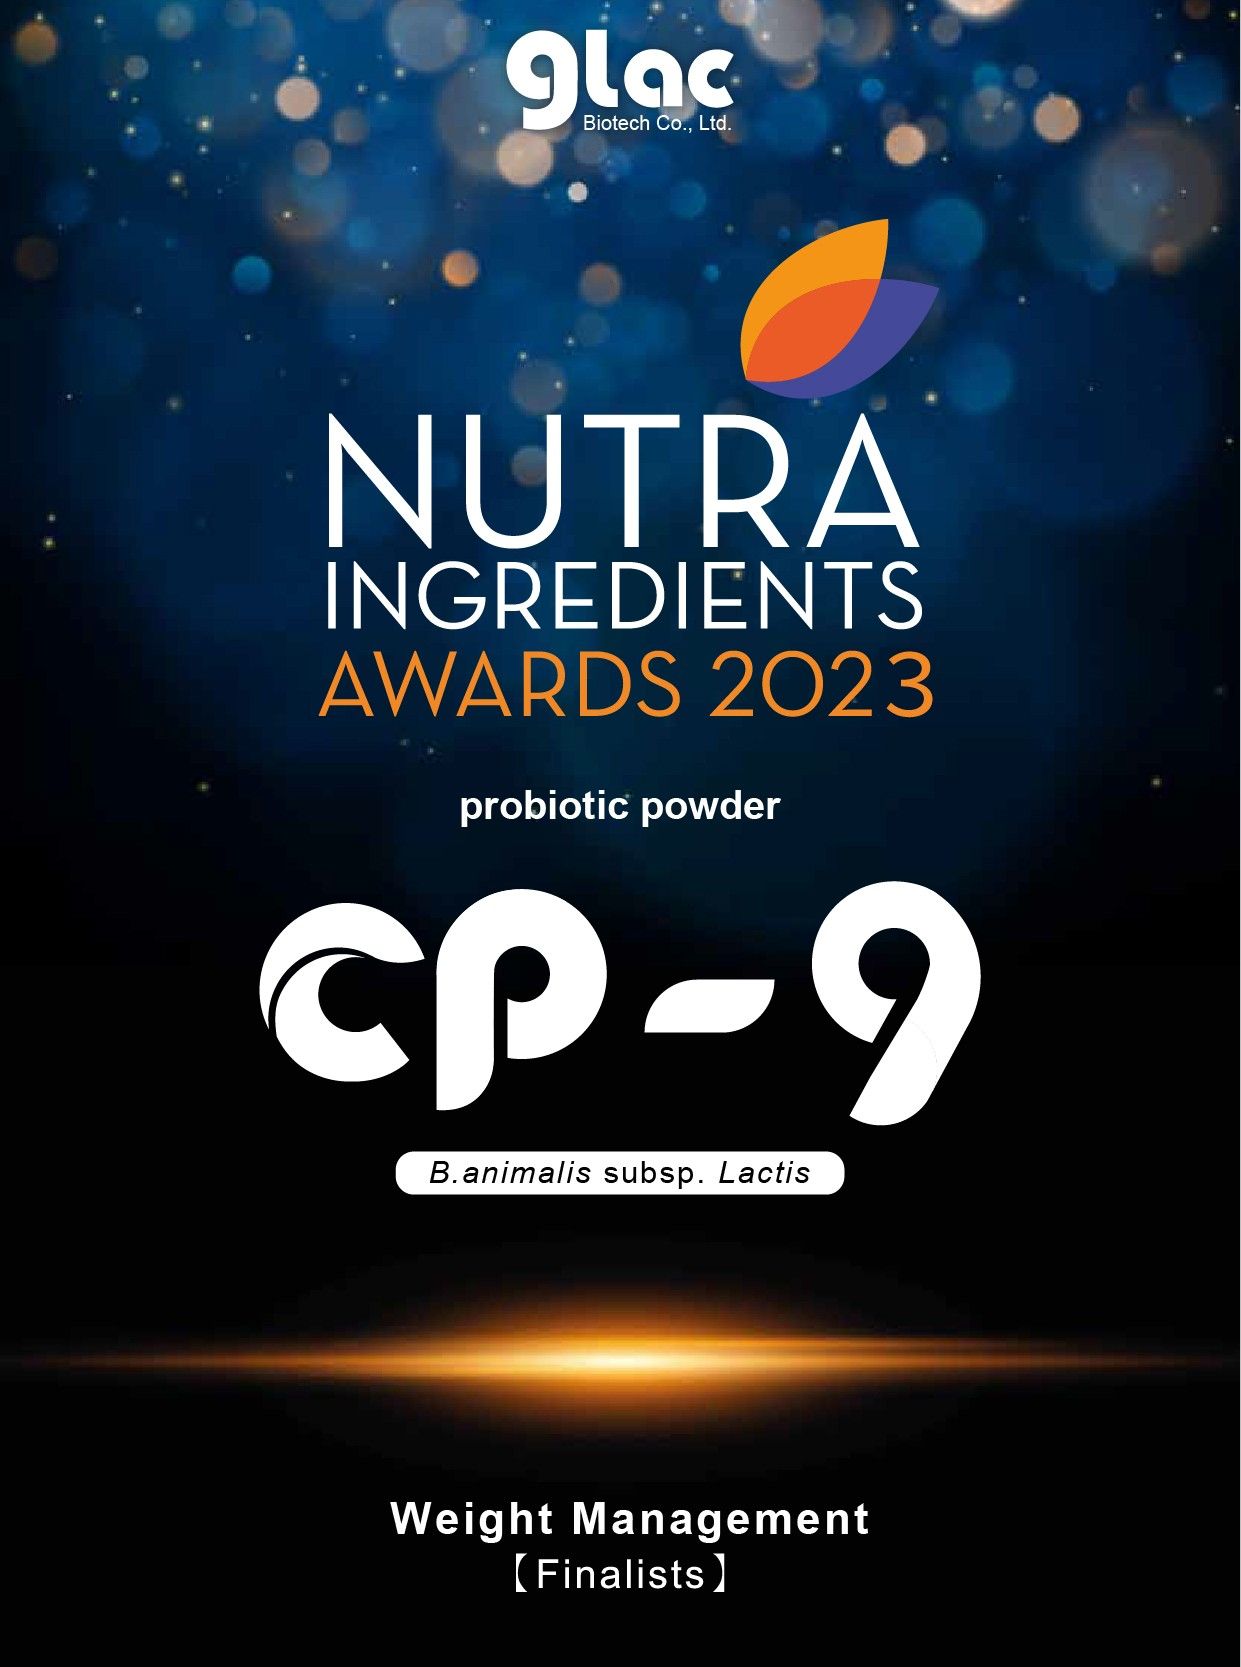 Glac B. animalis subsp. Lactis CP-9 has been selected as a finalist in the NutraIngredient Awards Europe 2023